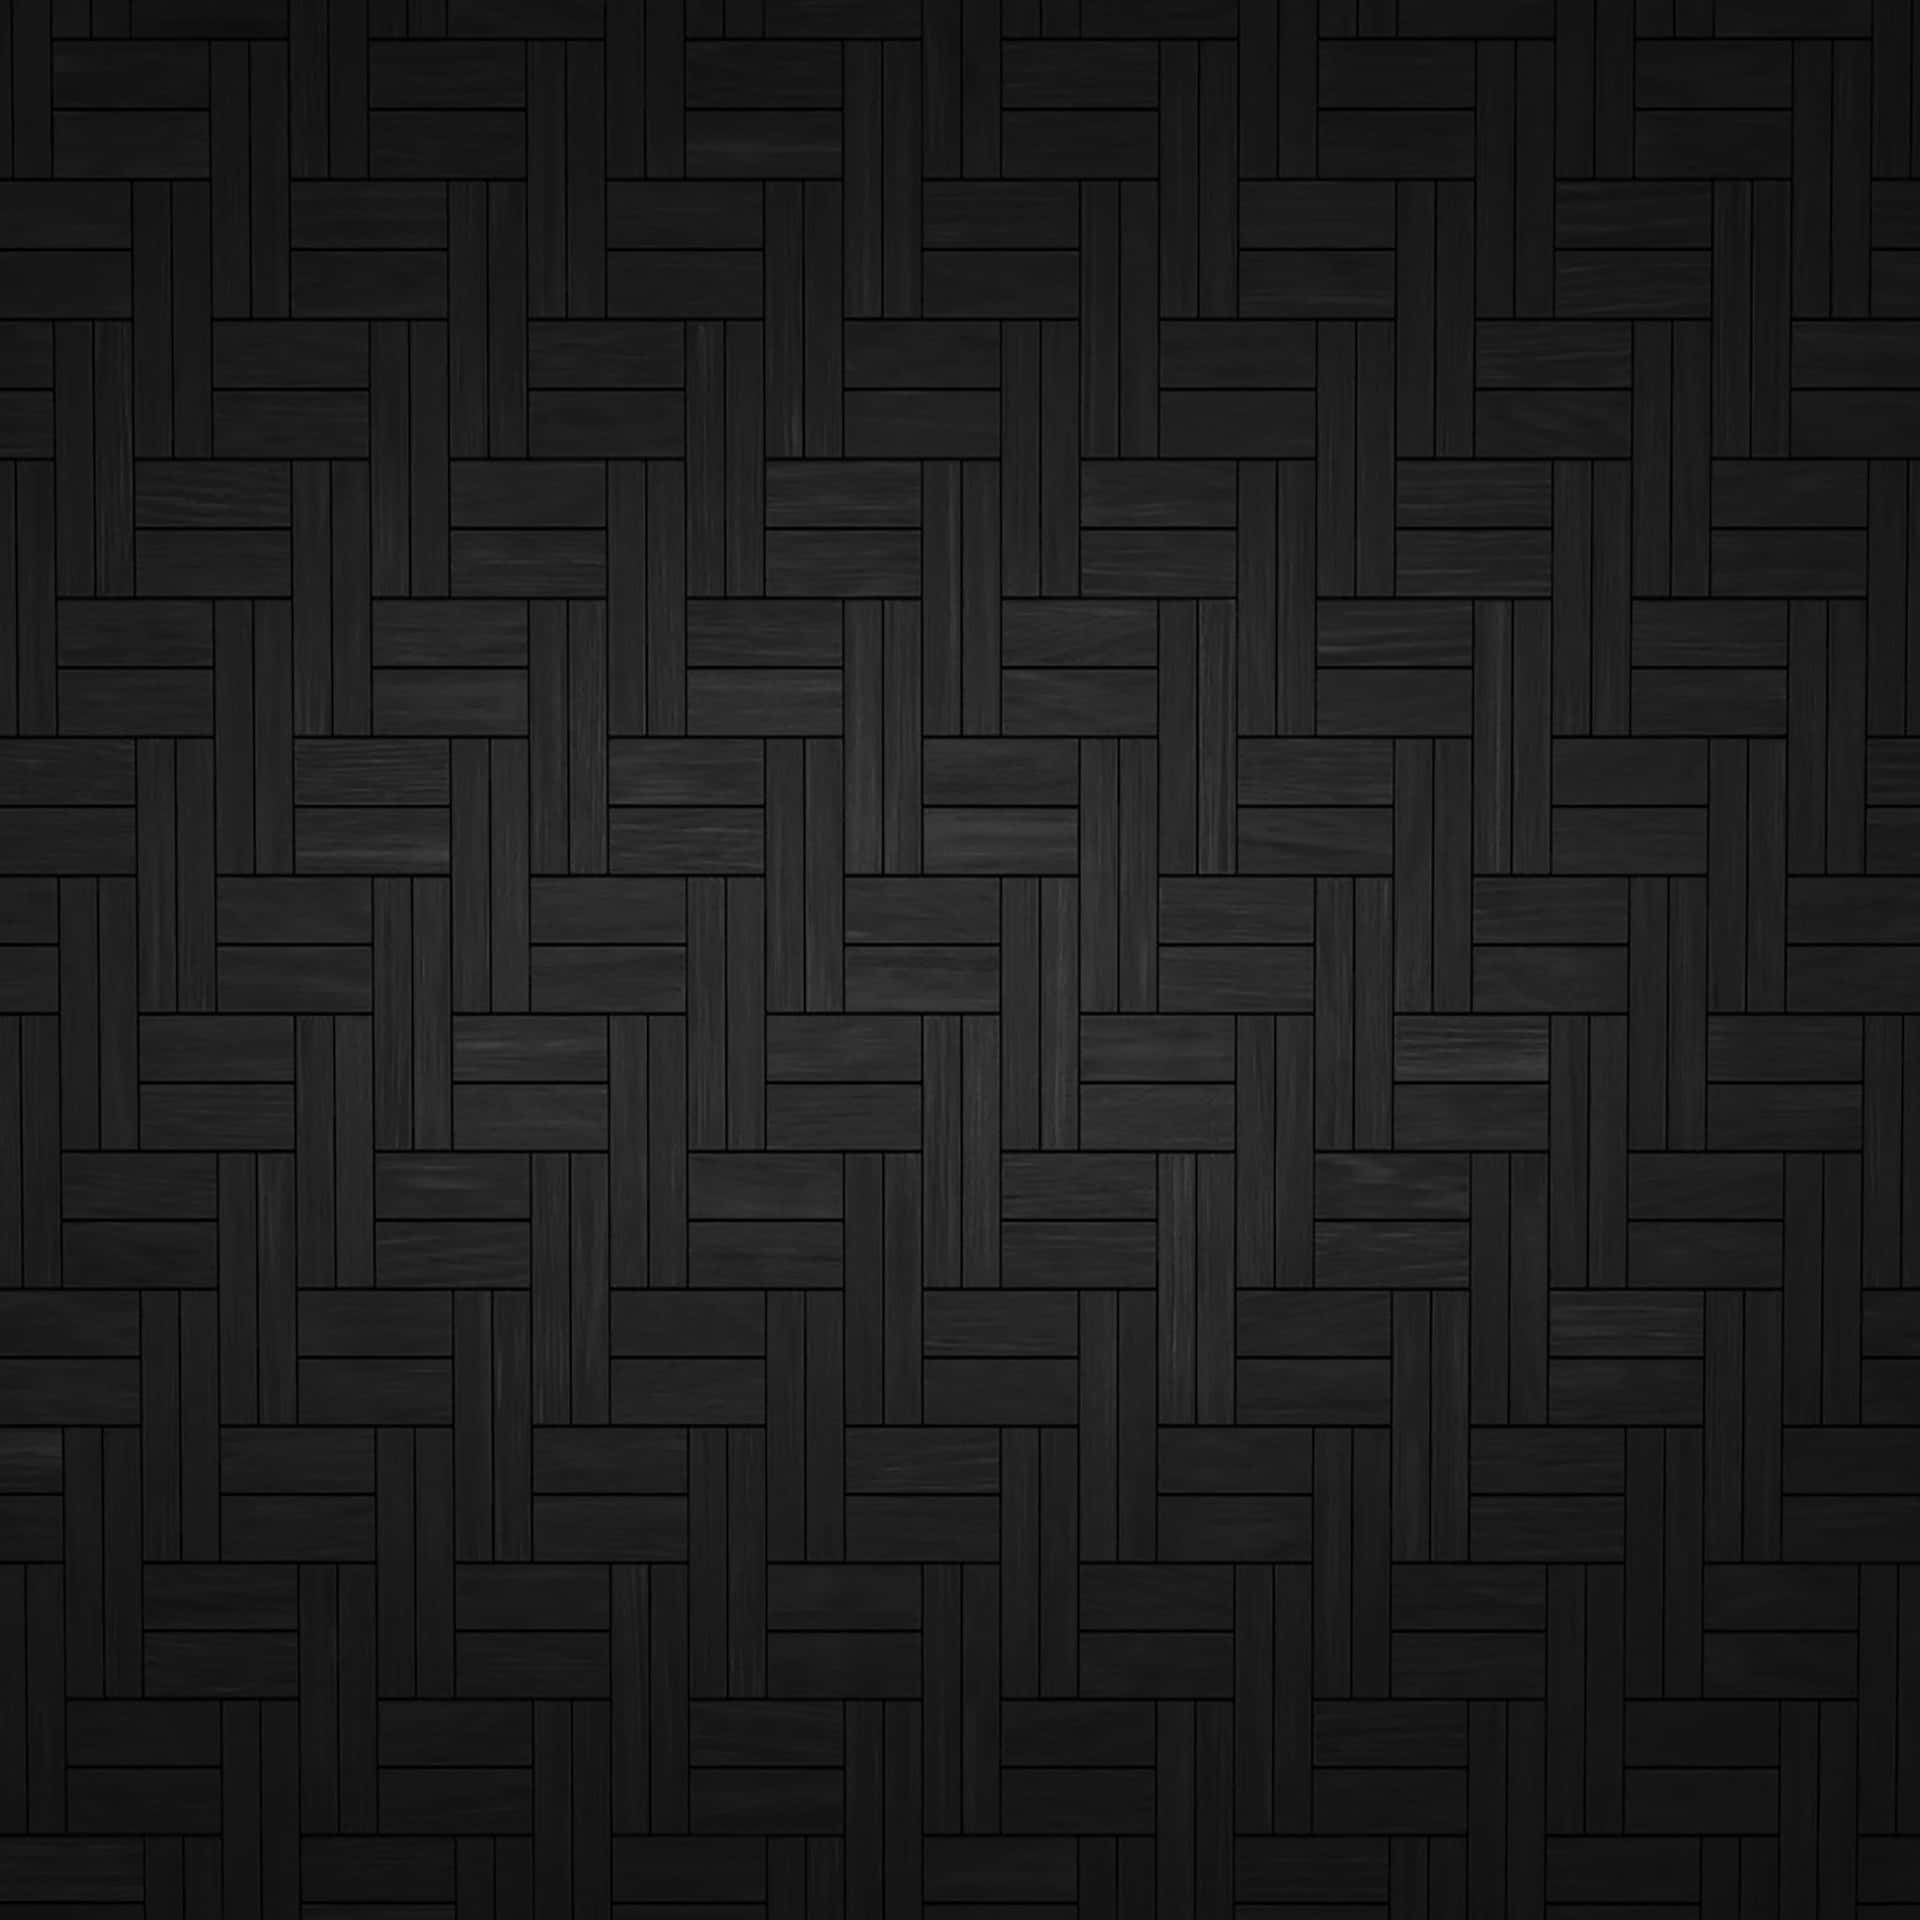 Black Ipad With Parallel Zig-zag Patterns Wallpaper